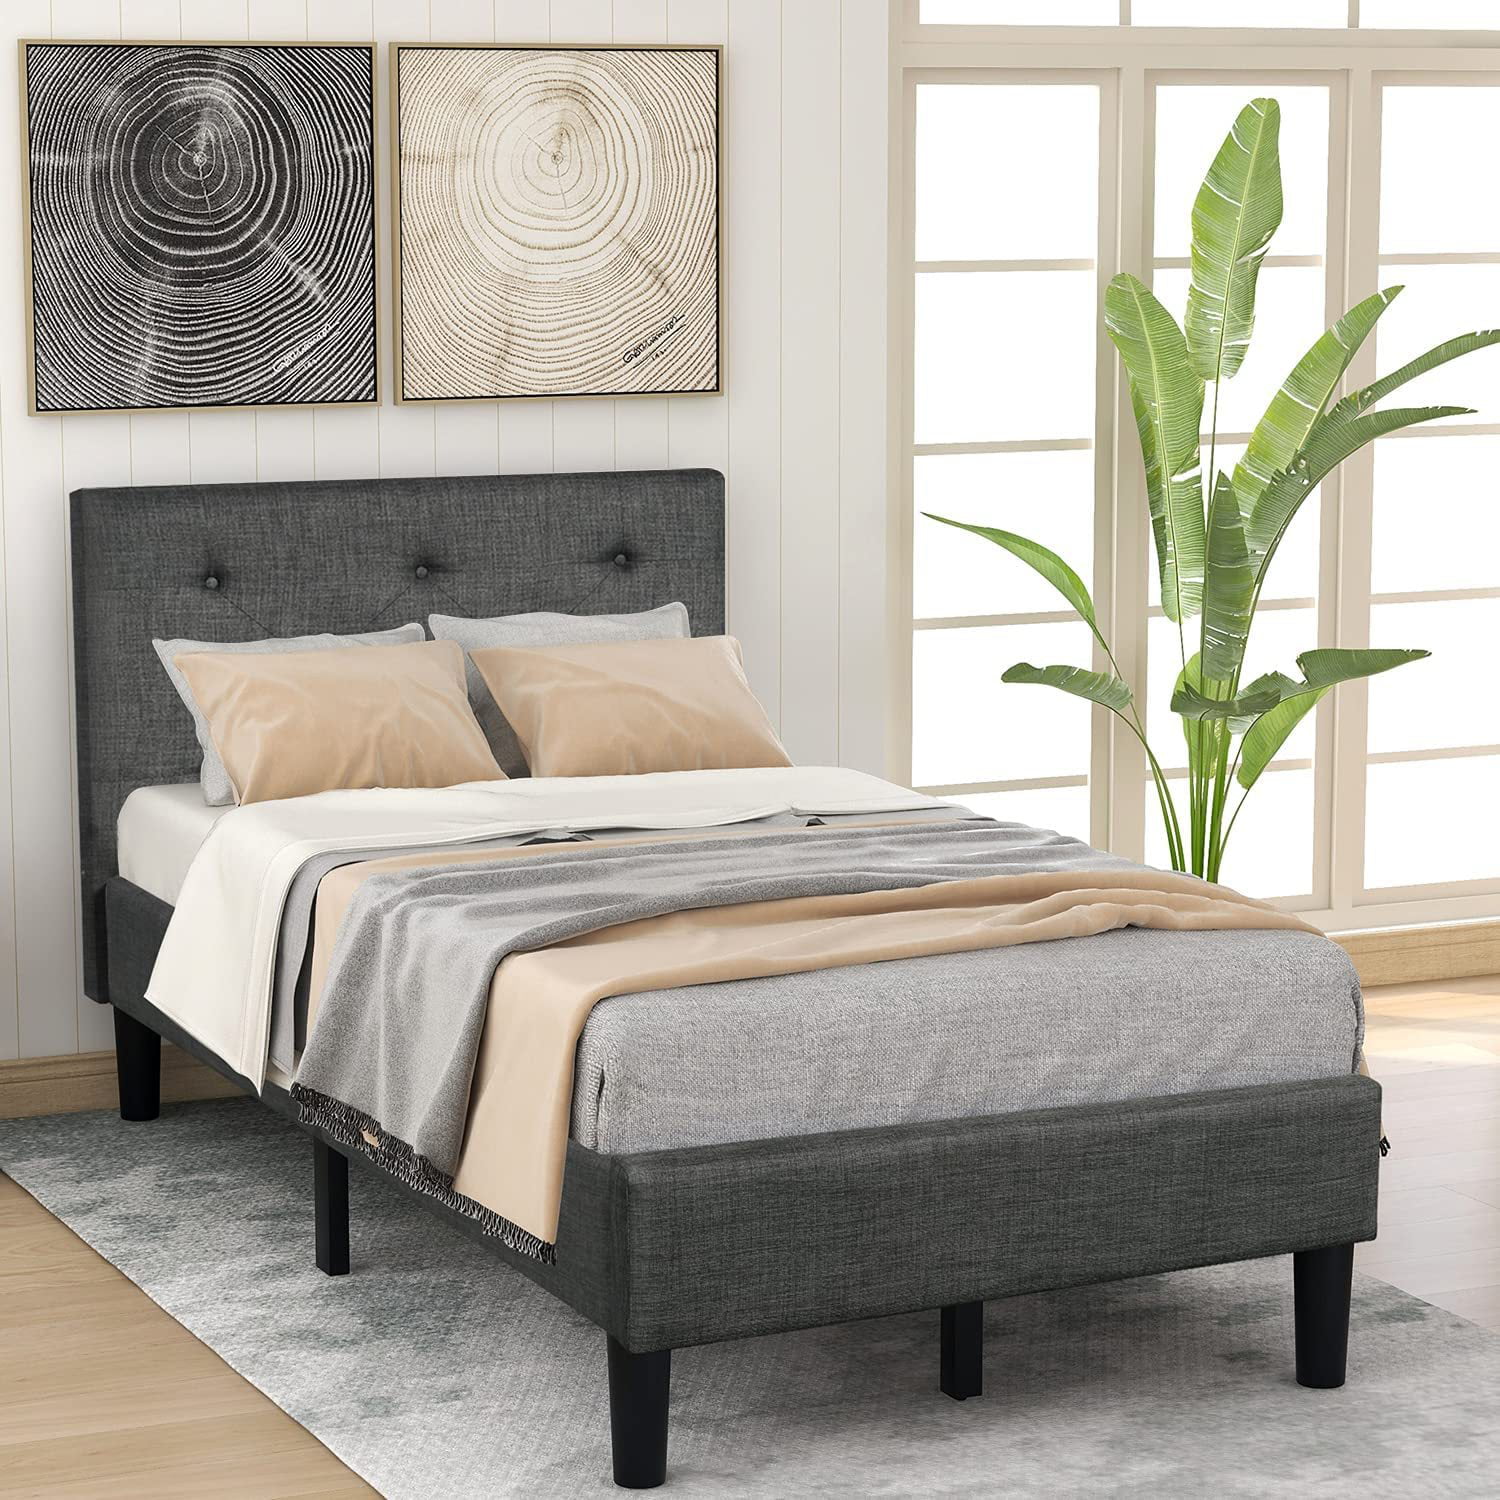 Rose Linen Tufted Upholstered Platform, Queen Gray Tufted Headboard And Footboard